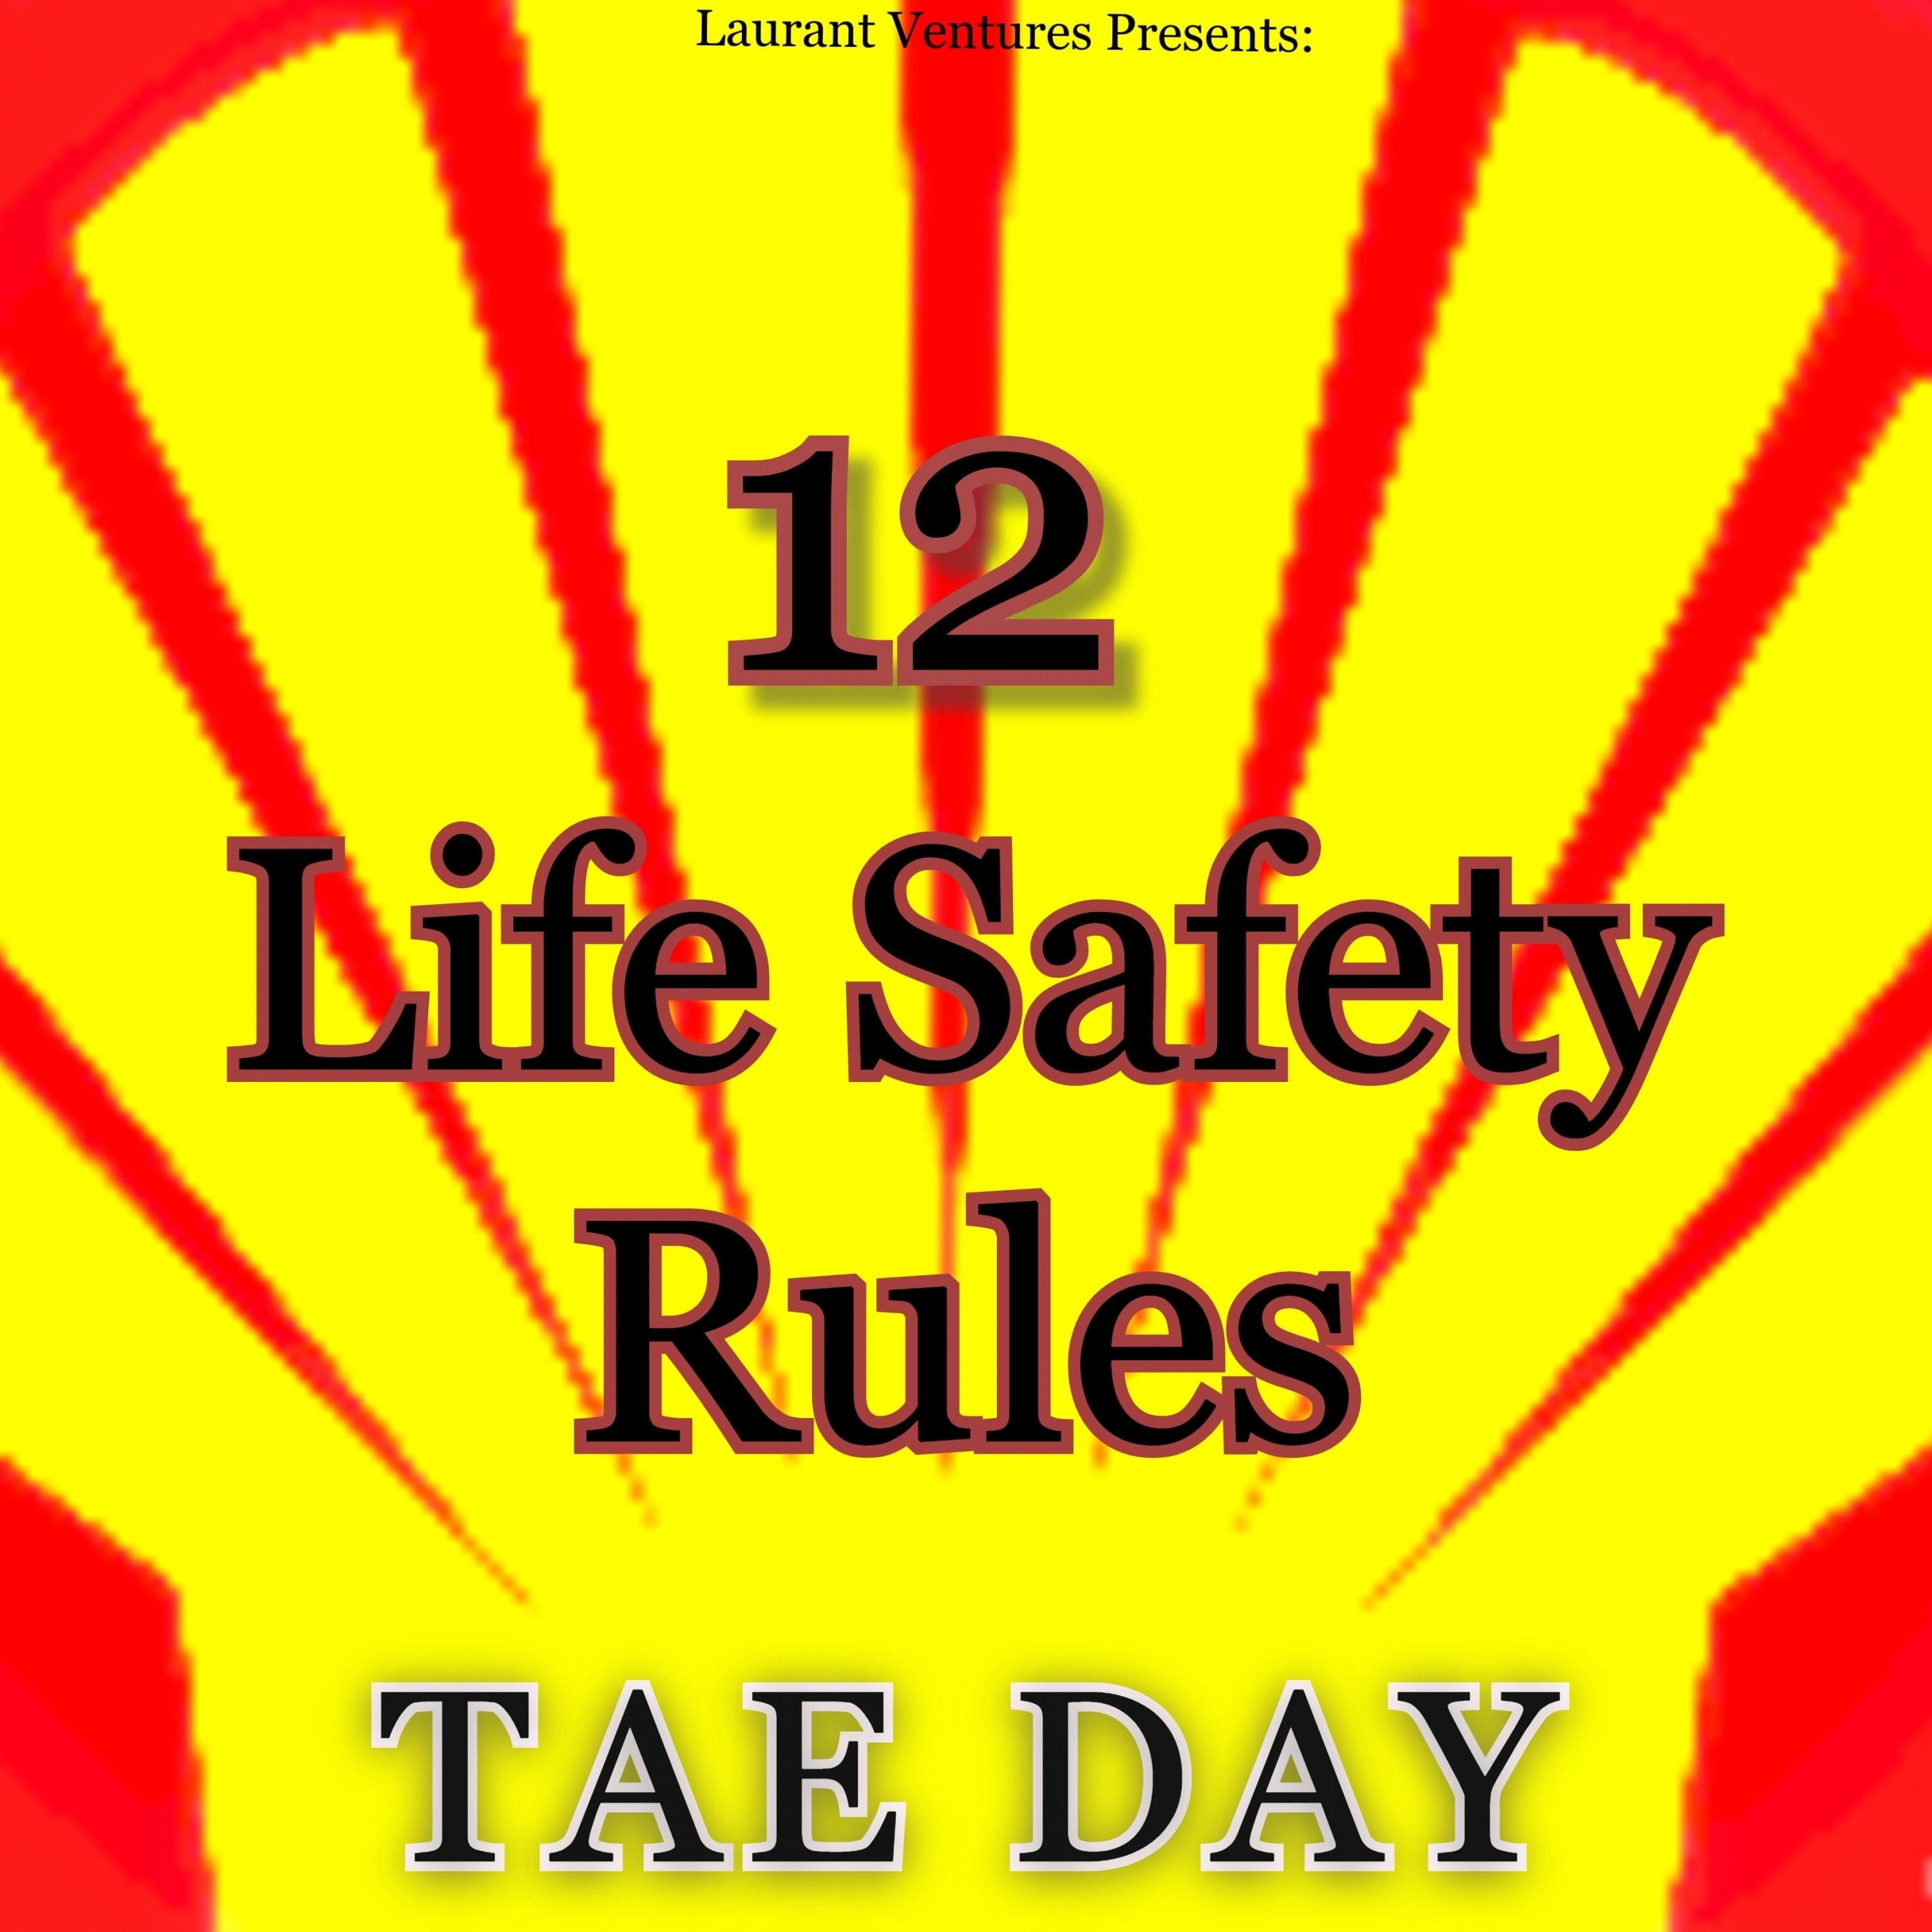 Life safety is. City Life and Country Life Safety Rules.